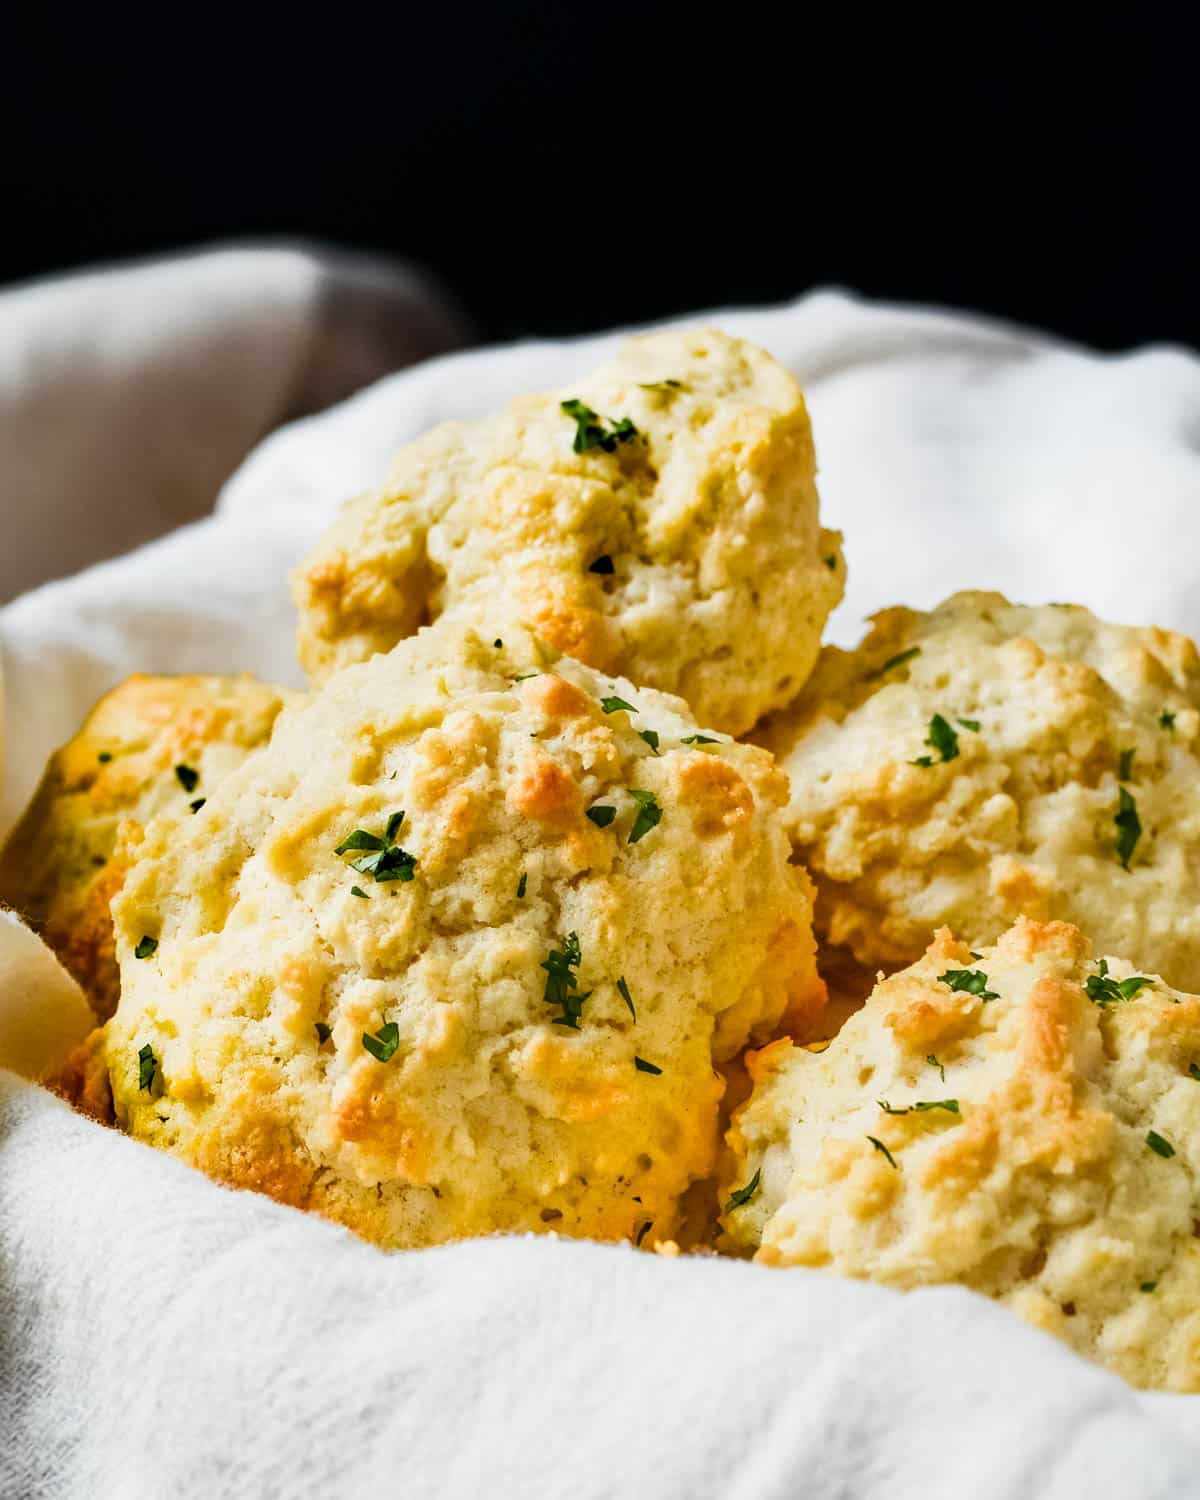 A bread basket filled with drop biscuits.